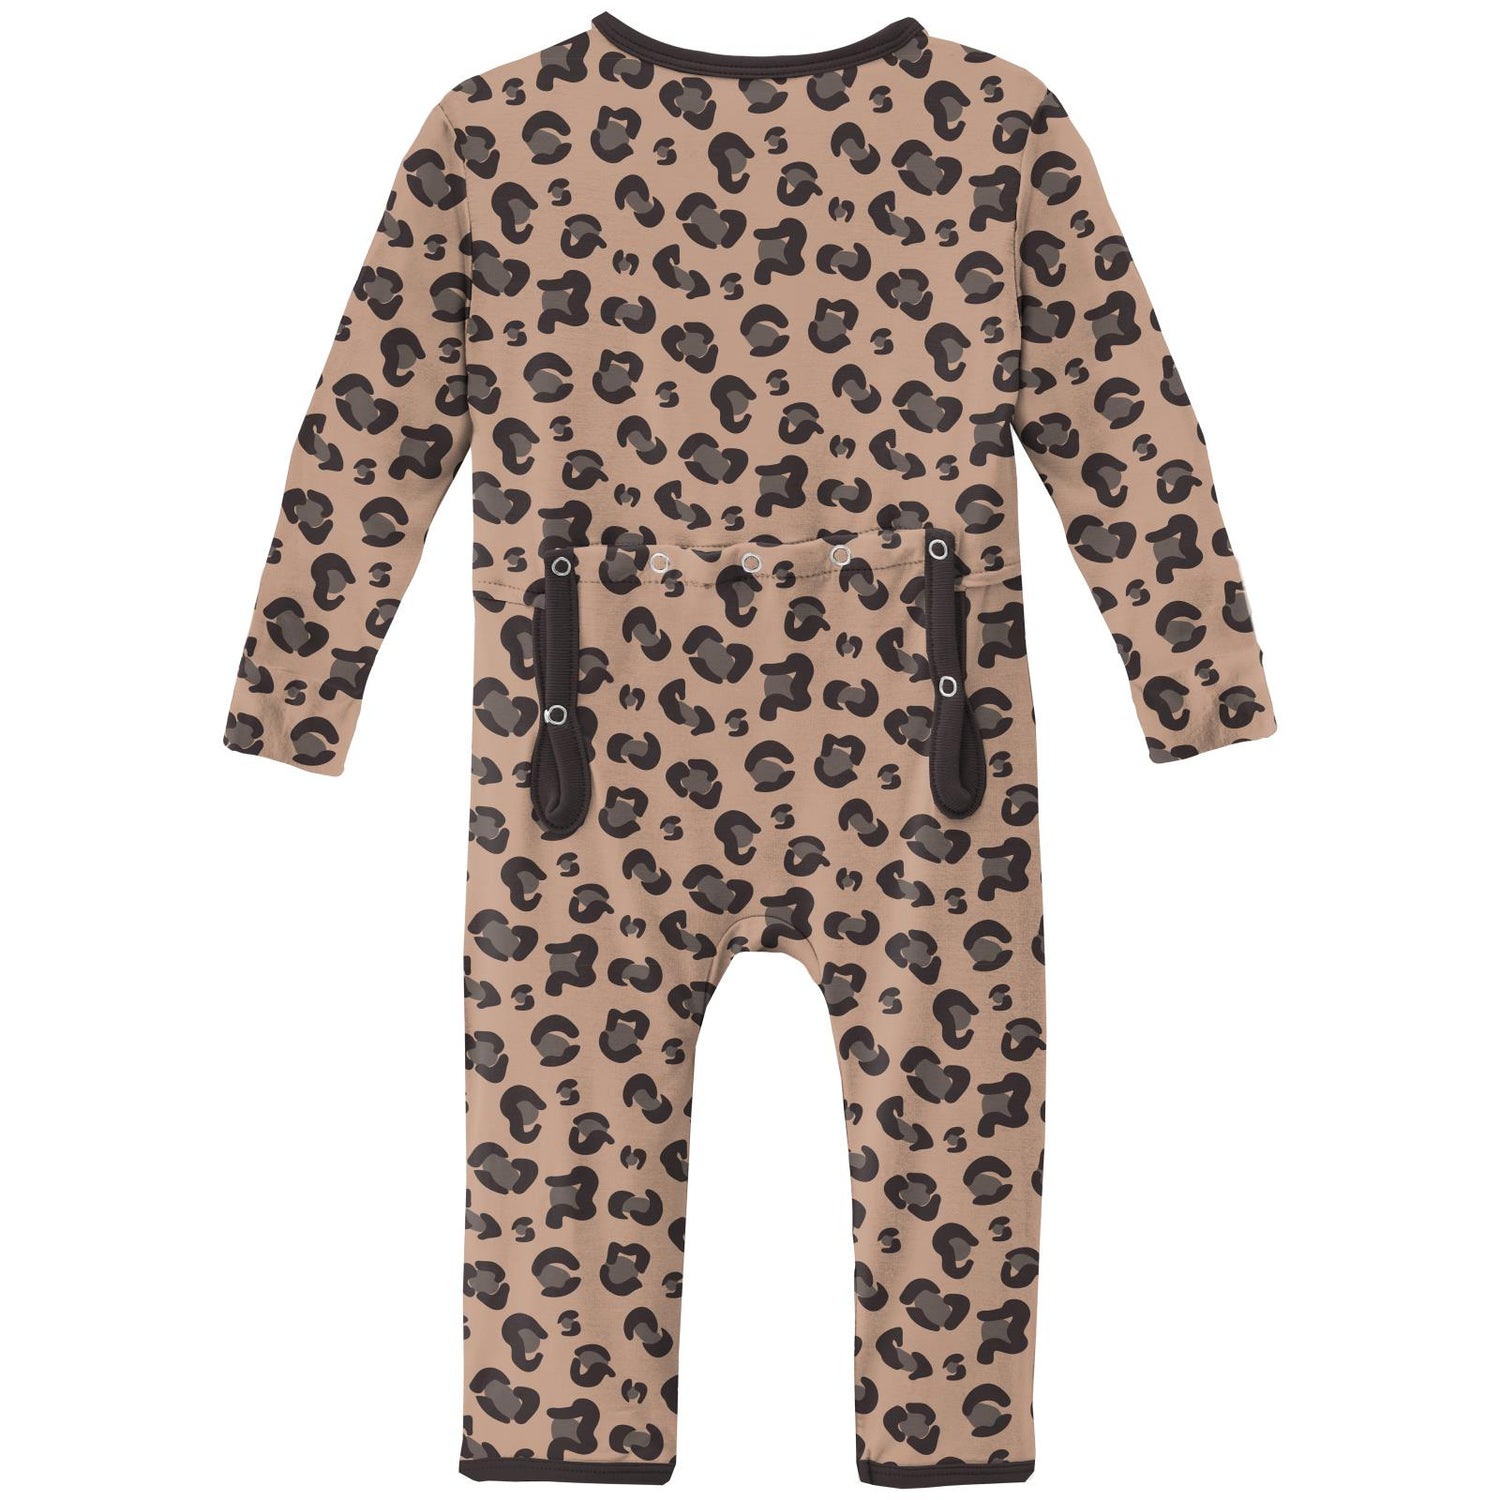 Print Coverall with Zipper in Suede Cheetah Print